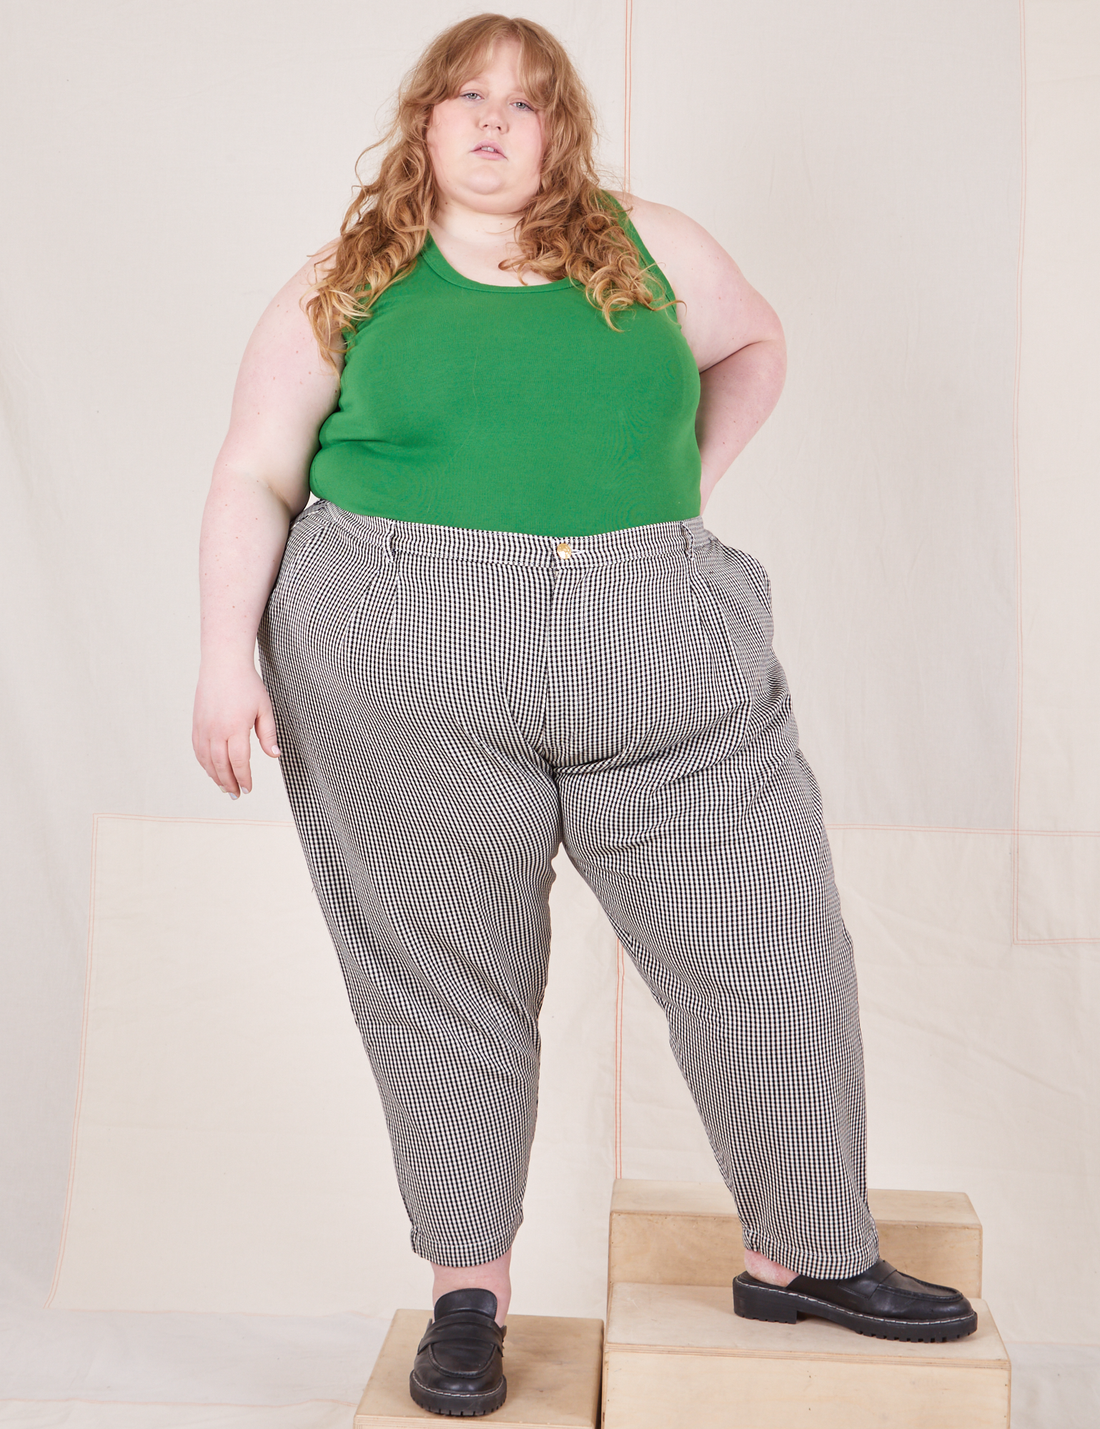 Catie is 5'11 and wearing 4XL Checker Trousers in Black & White paired with forest green Tank Top